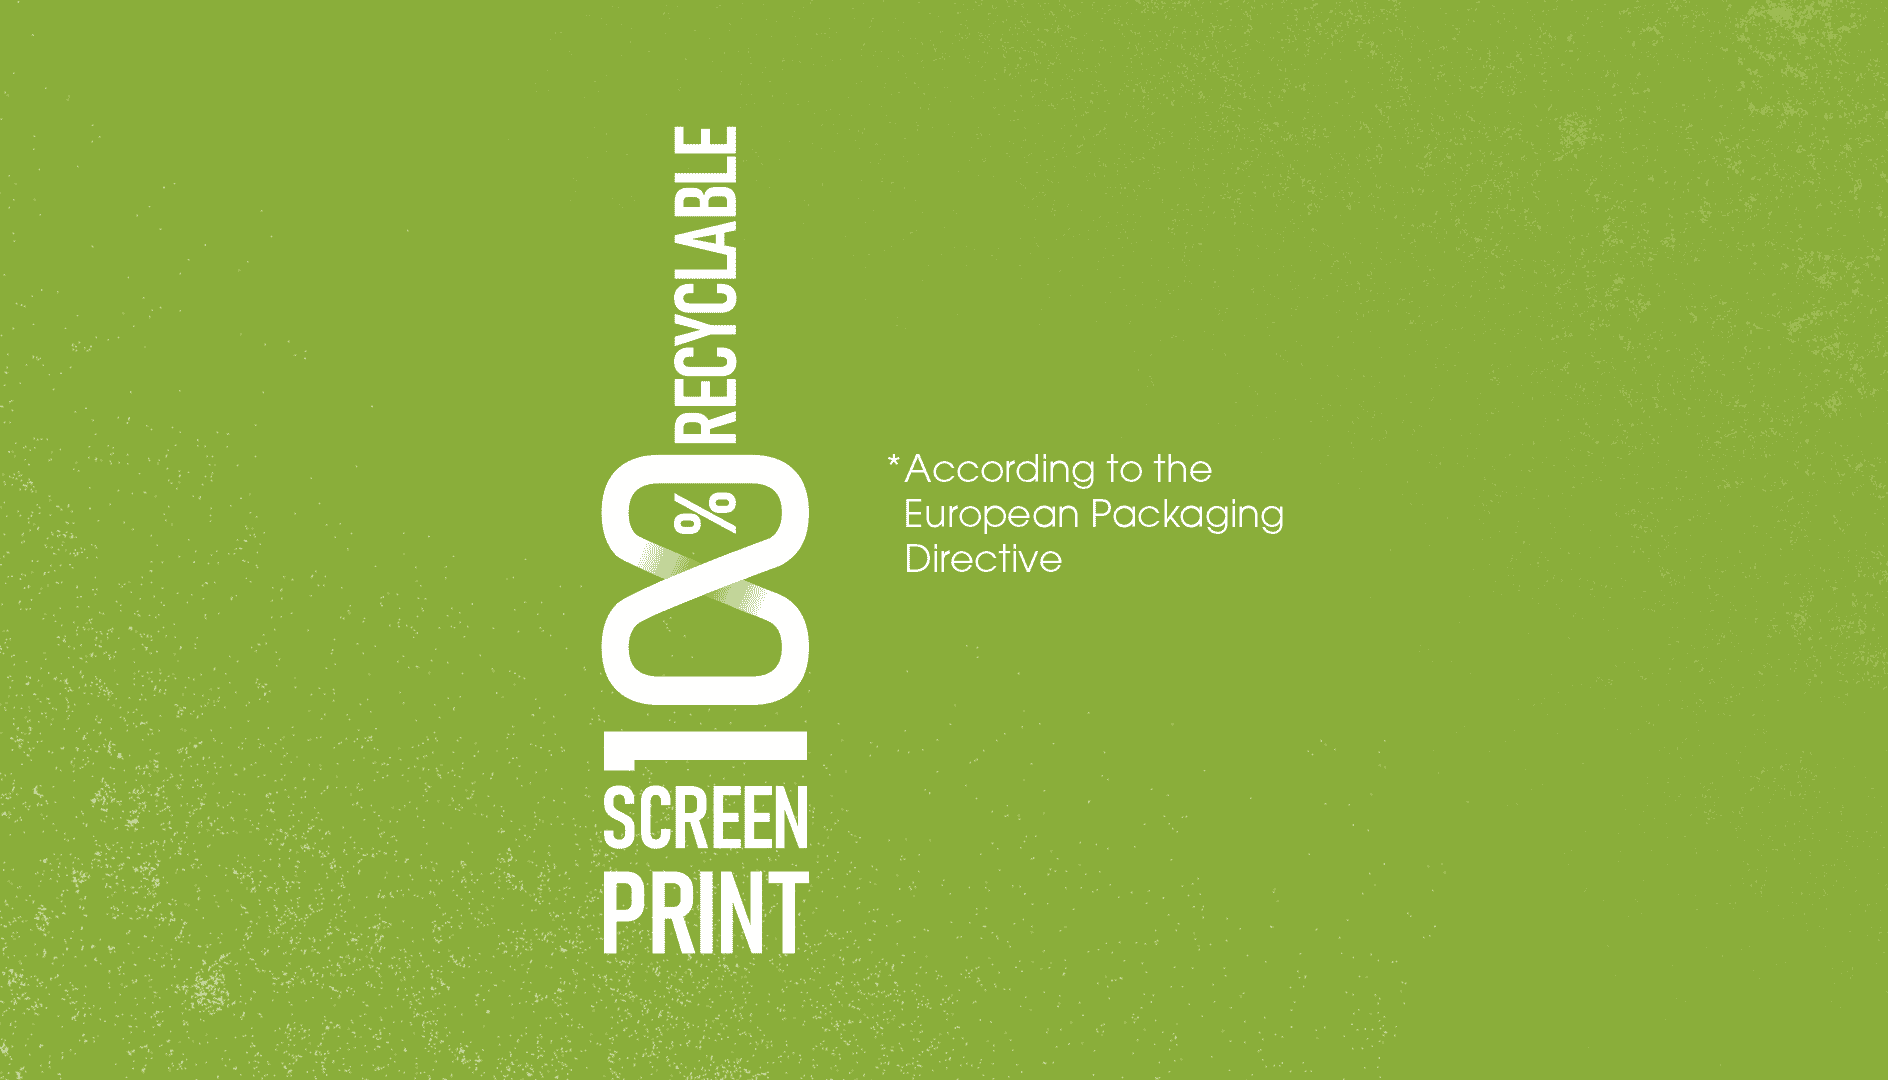 screen print is 100% recyclable